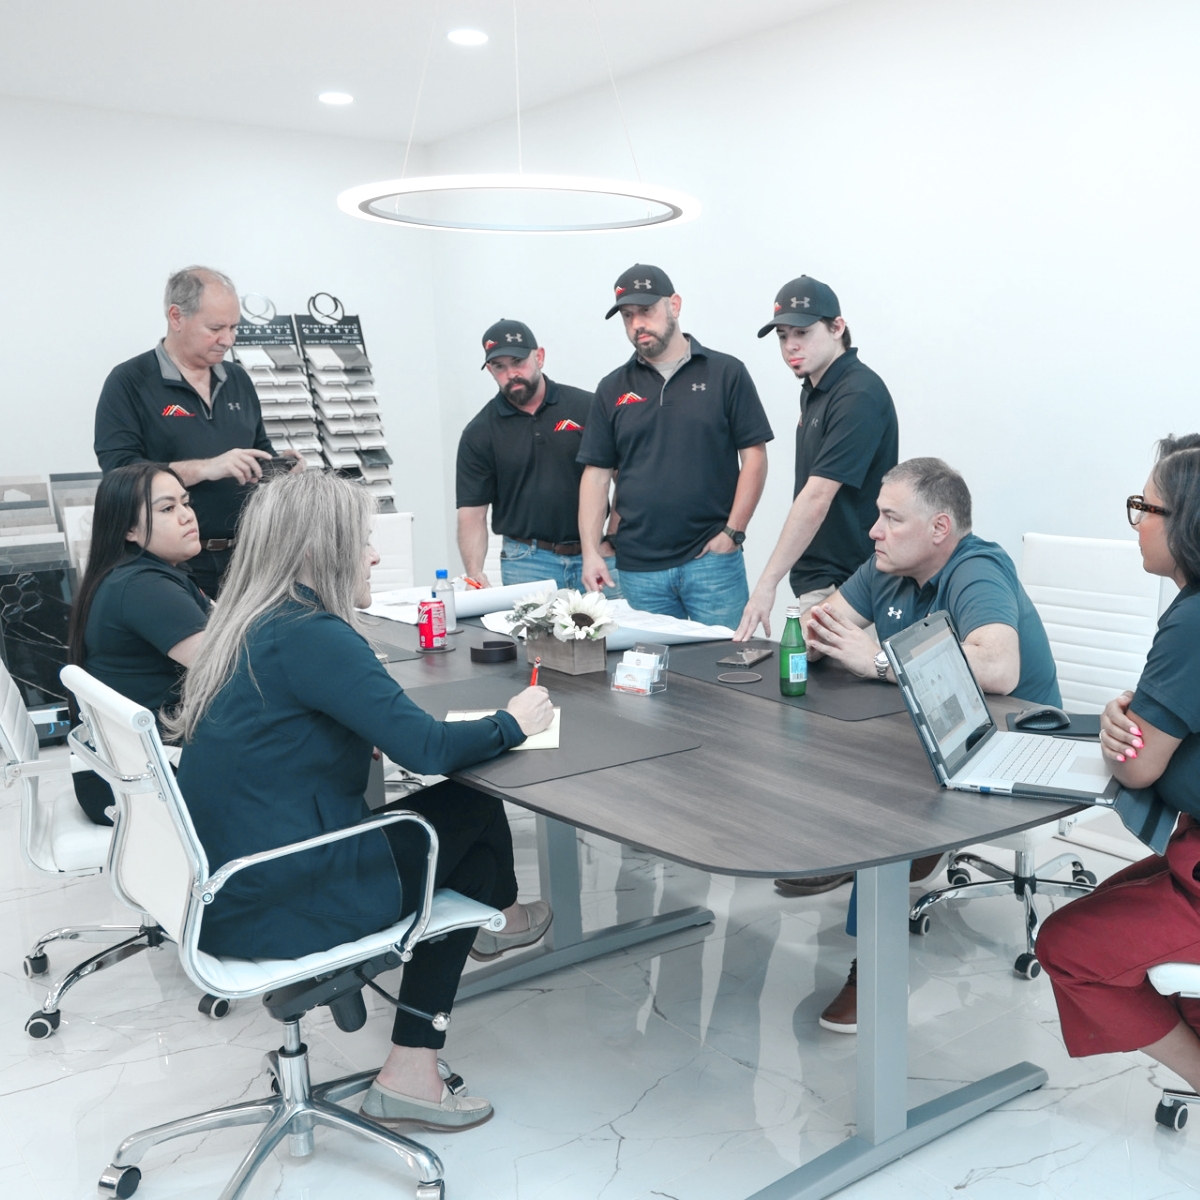 A group of people sitting around a table in an office during a retail store remodeling brainstorming session.